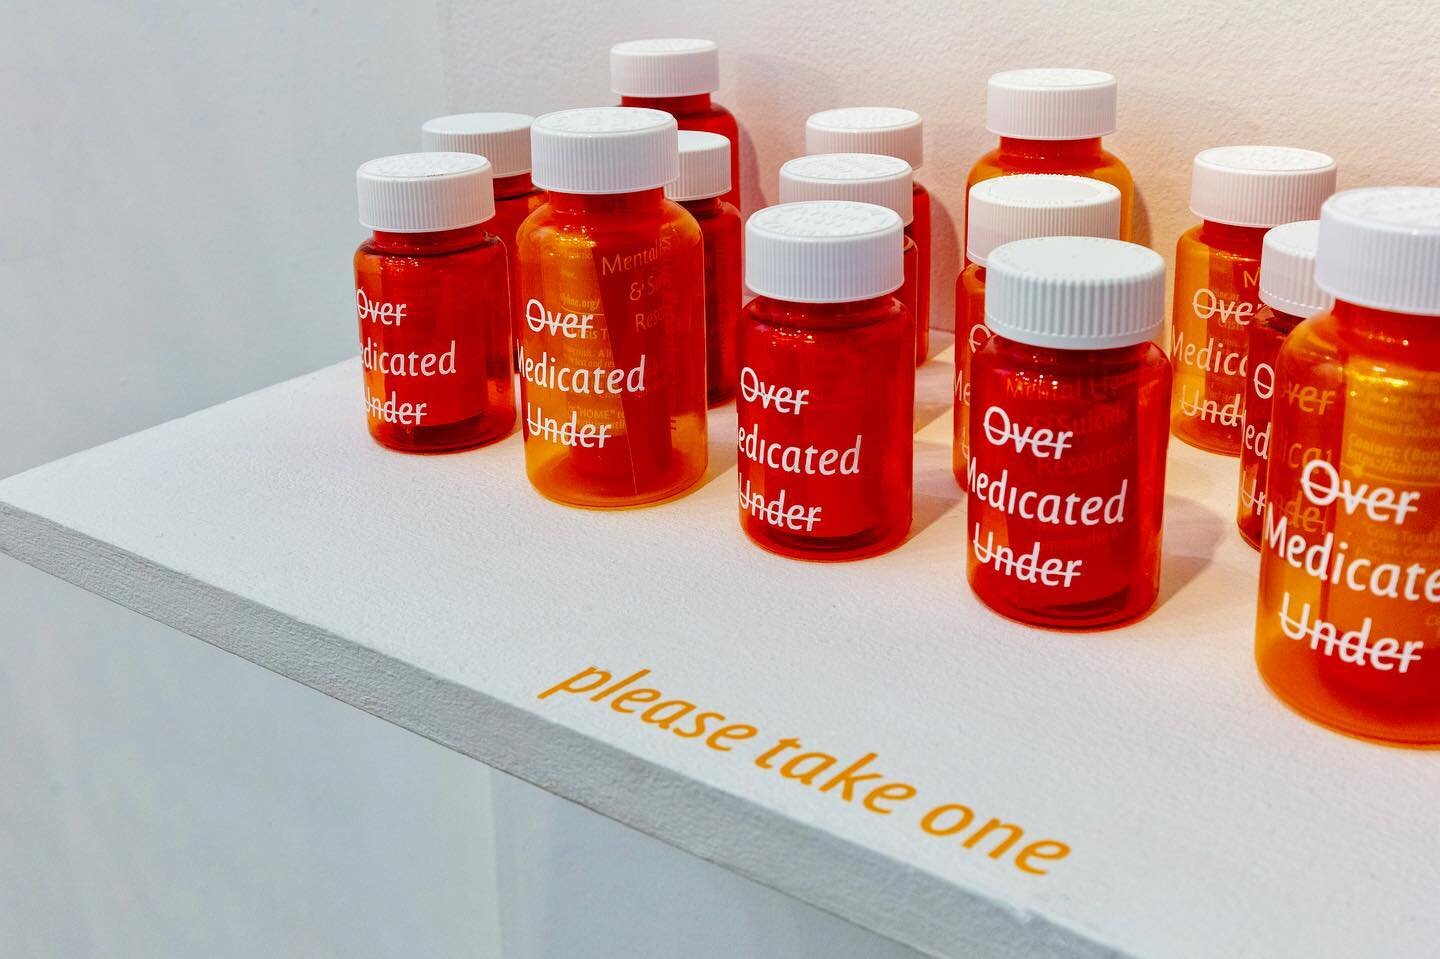 swipe for mental health and suicide resources ♡ 

Integrated into my thesis installation, these little takeaway bottles hope to provide knowledge of lifesaving resources &hearts;

Inside you can find info for:

National Suicide Prevention
Lifeline; C